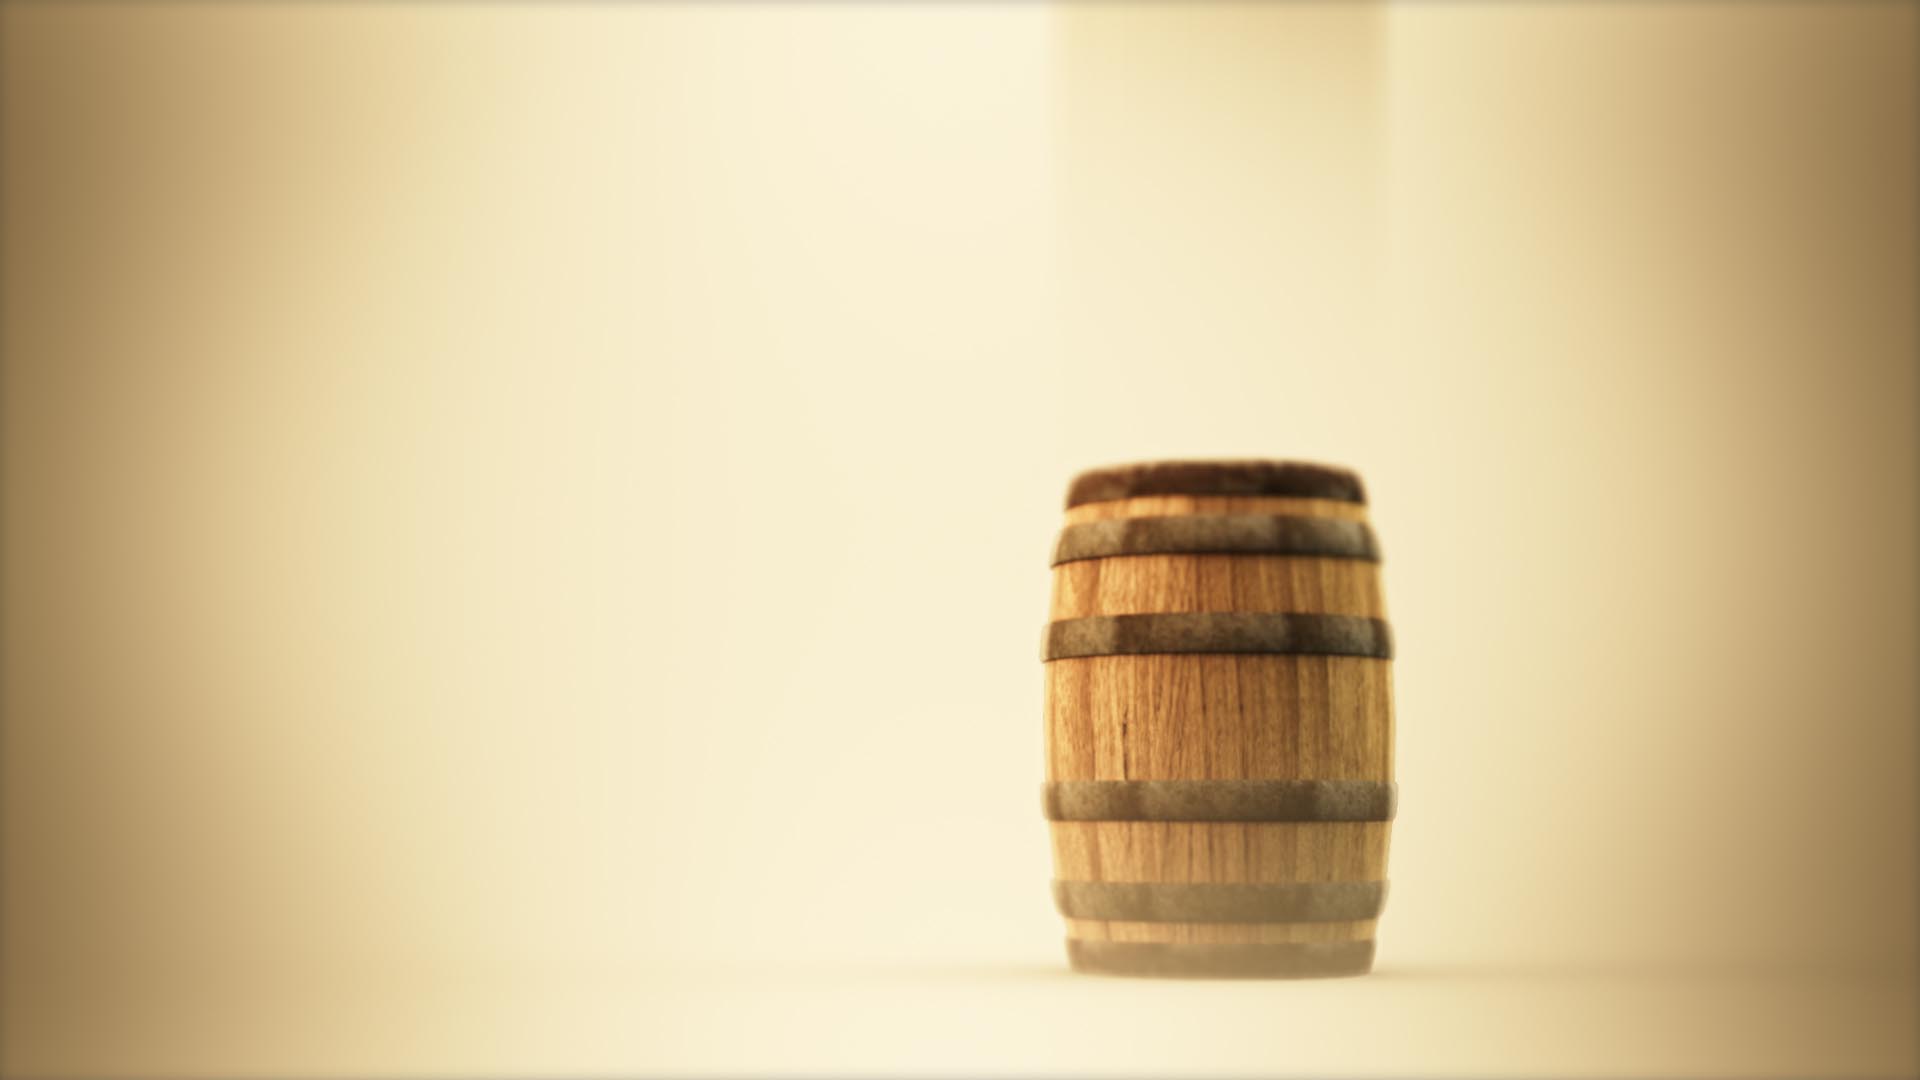 3D animation of a wooden barrel